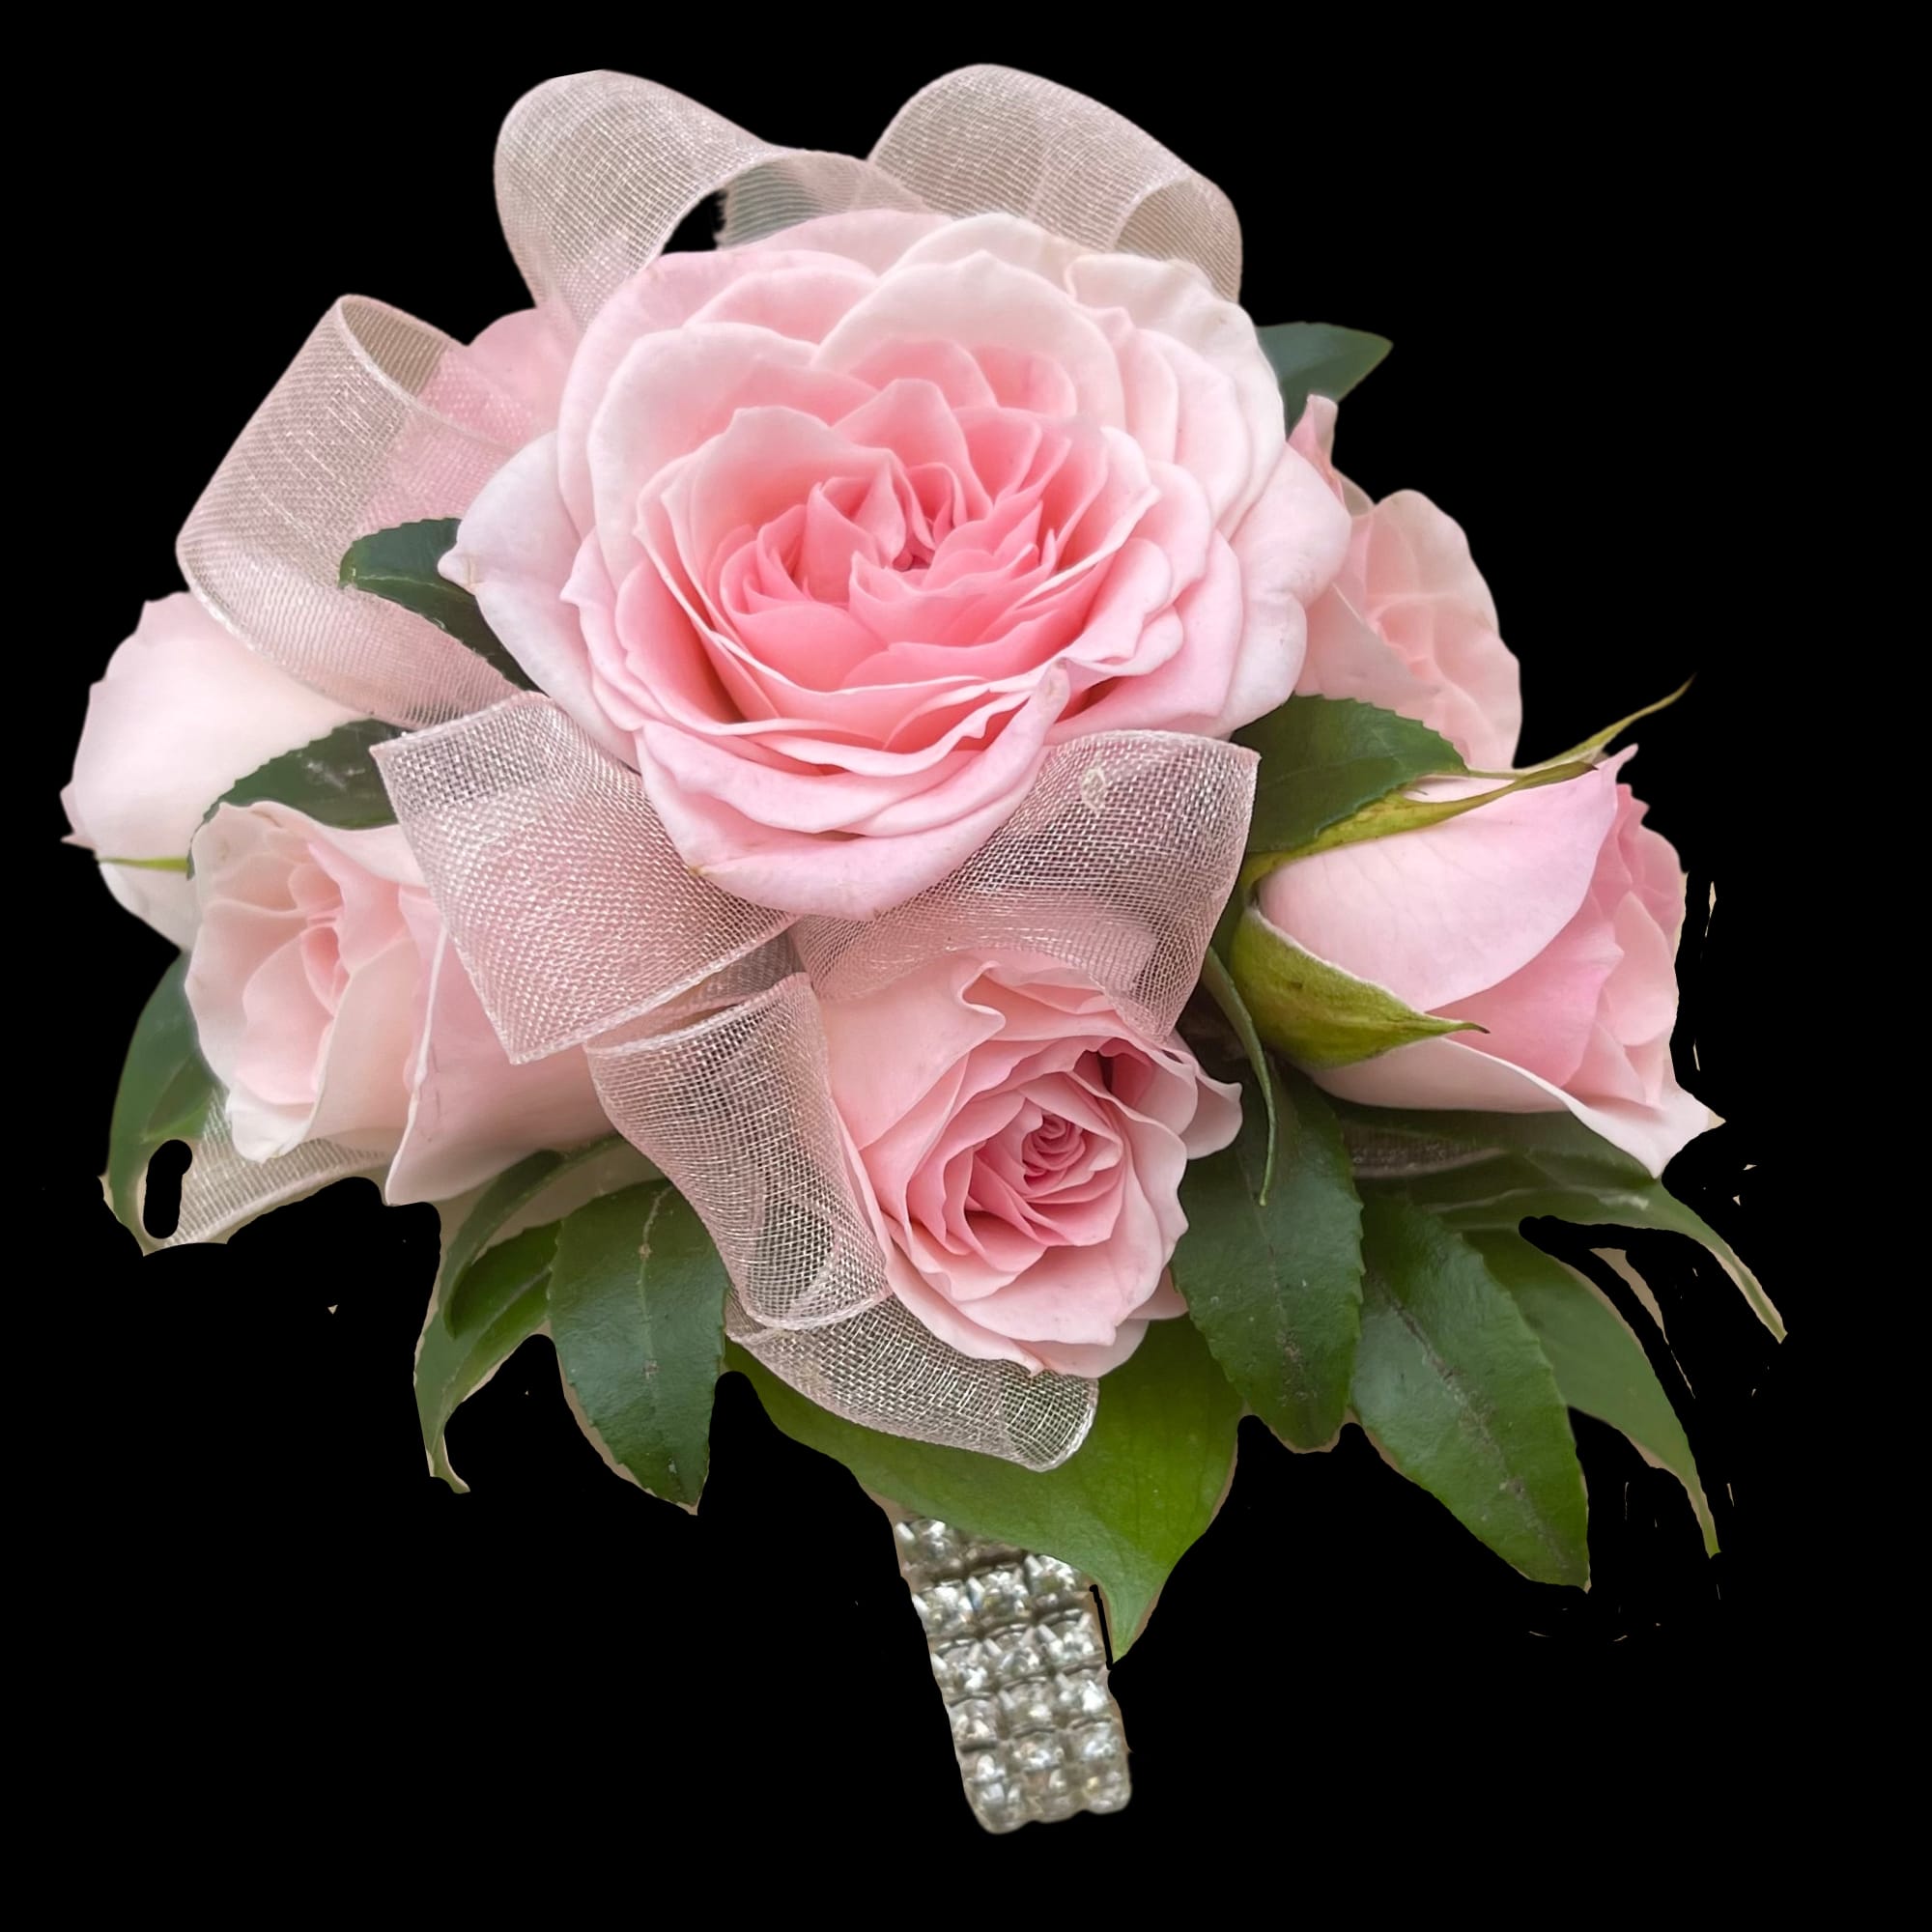 Wrist Corsage - Mini Roses - Pale Pink - PICK UP ONLY  About 7-8 Pale Pink Mini Roses with pink ribbon on a rhinestone bracelet. Corsage about 4&quot;.  Select Deluxe option to embellish with rhinestones. To select different ribbon color, note in &quot;florist instruction&quot; at checkout Available: White, Black, Silver, Gold, Red, Navy, Royal, Lt Blue, Purple, Lavender, Peach, Lt Pink, Hot Pink, Iridescent 